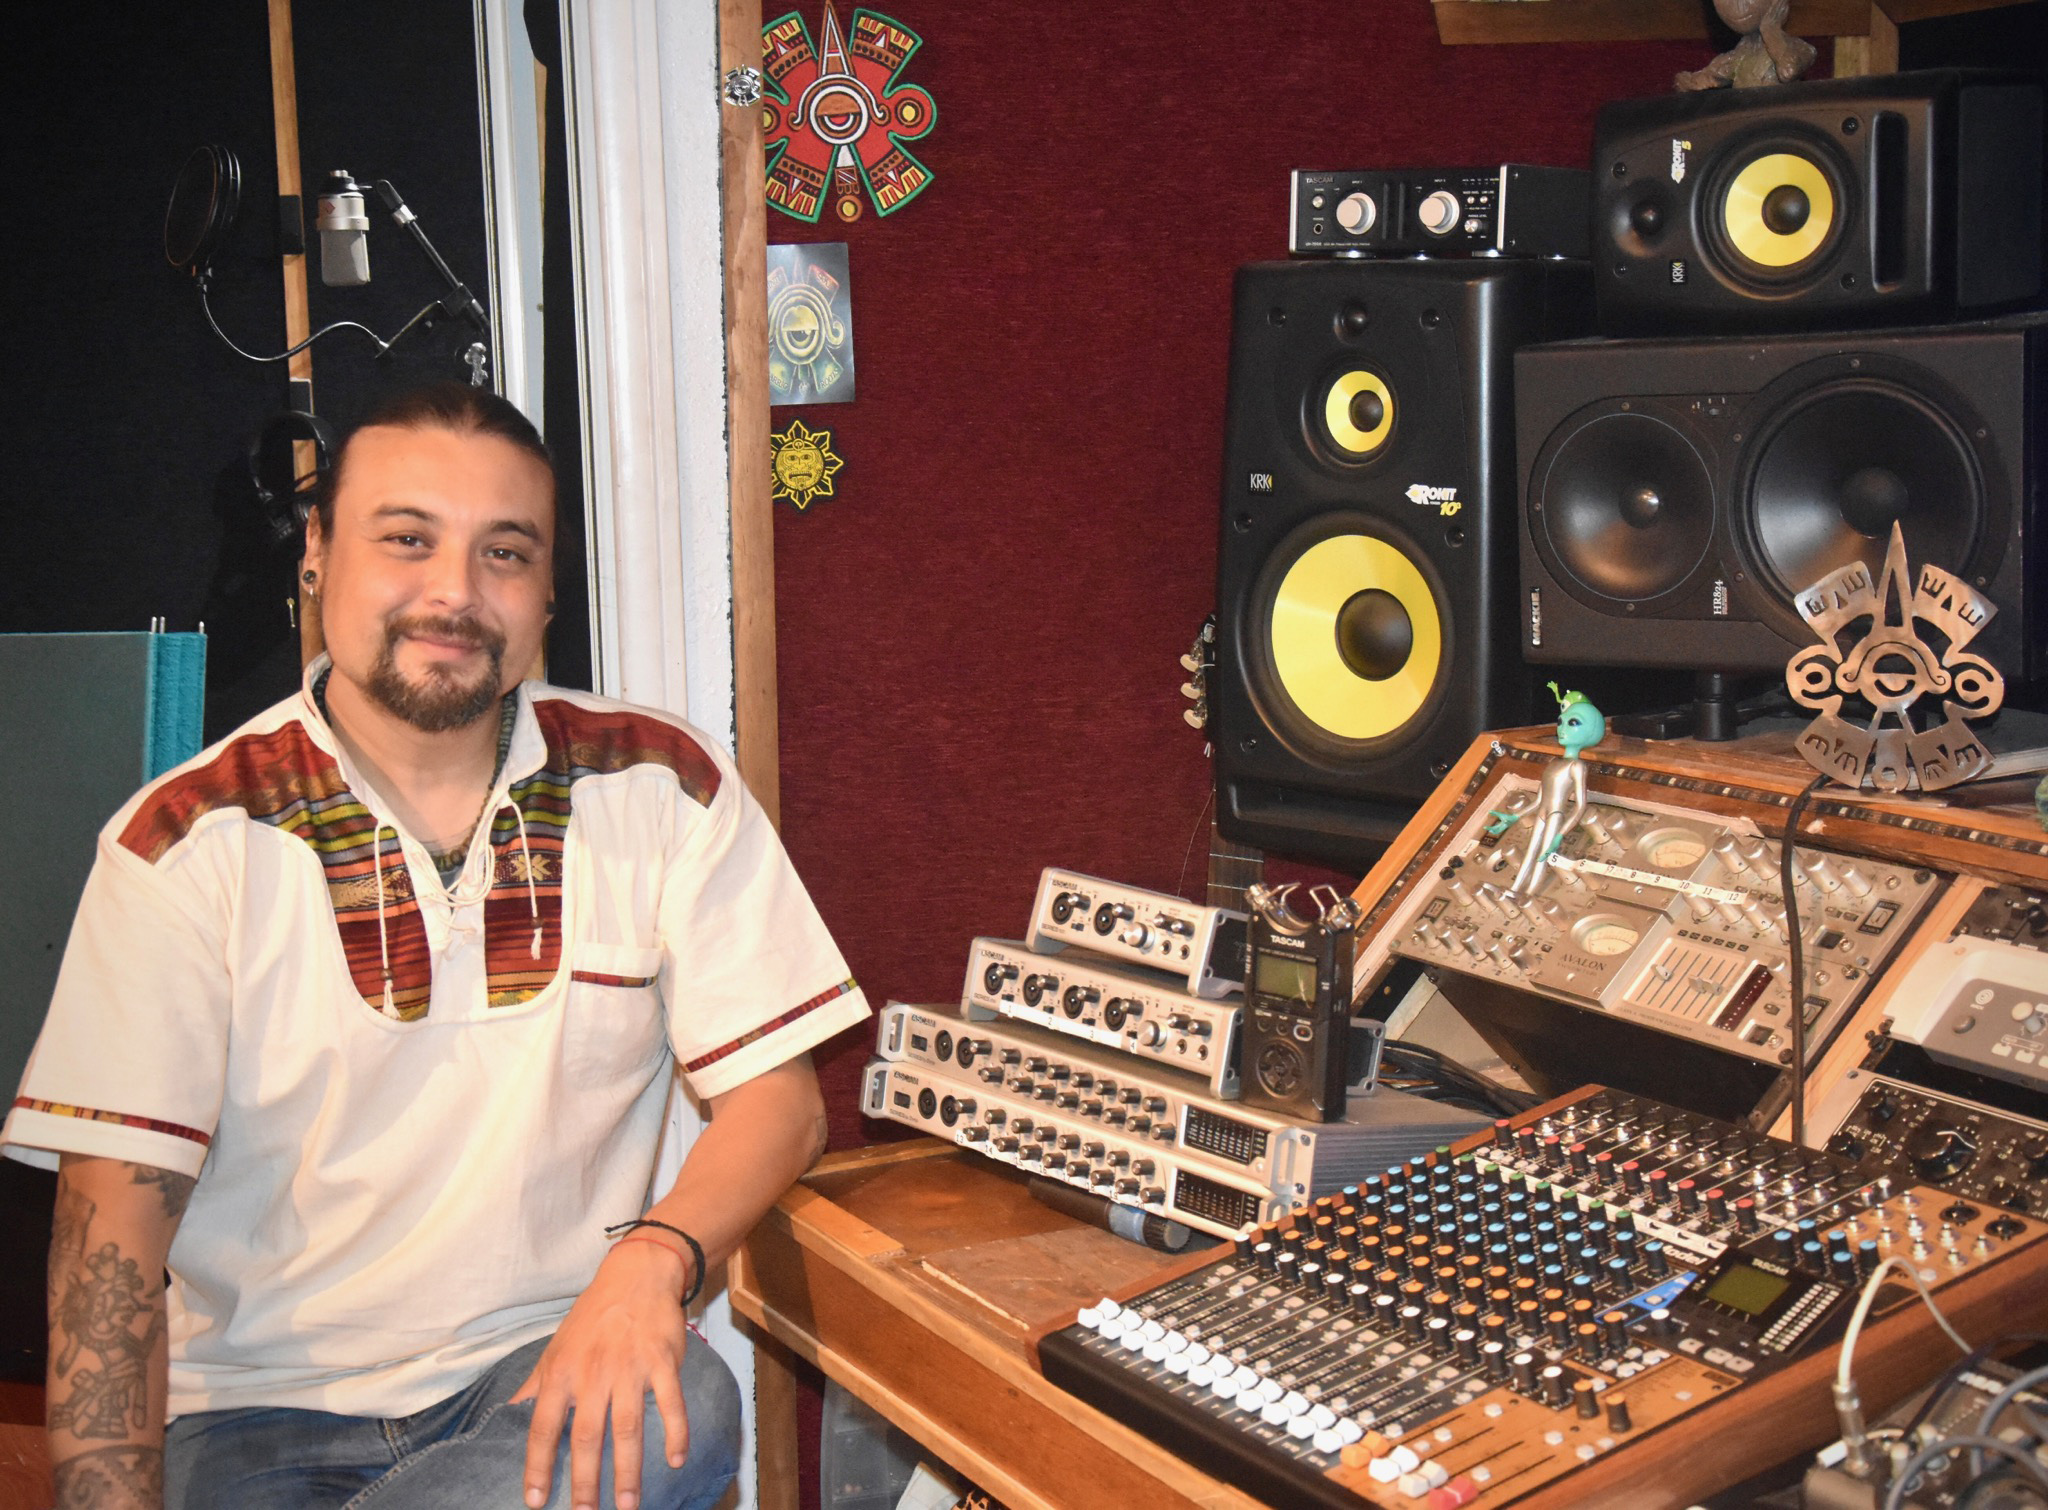 TASCAM Recording Technology is Central to the Studio Activities of Mizraim 'Limon' Leal